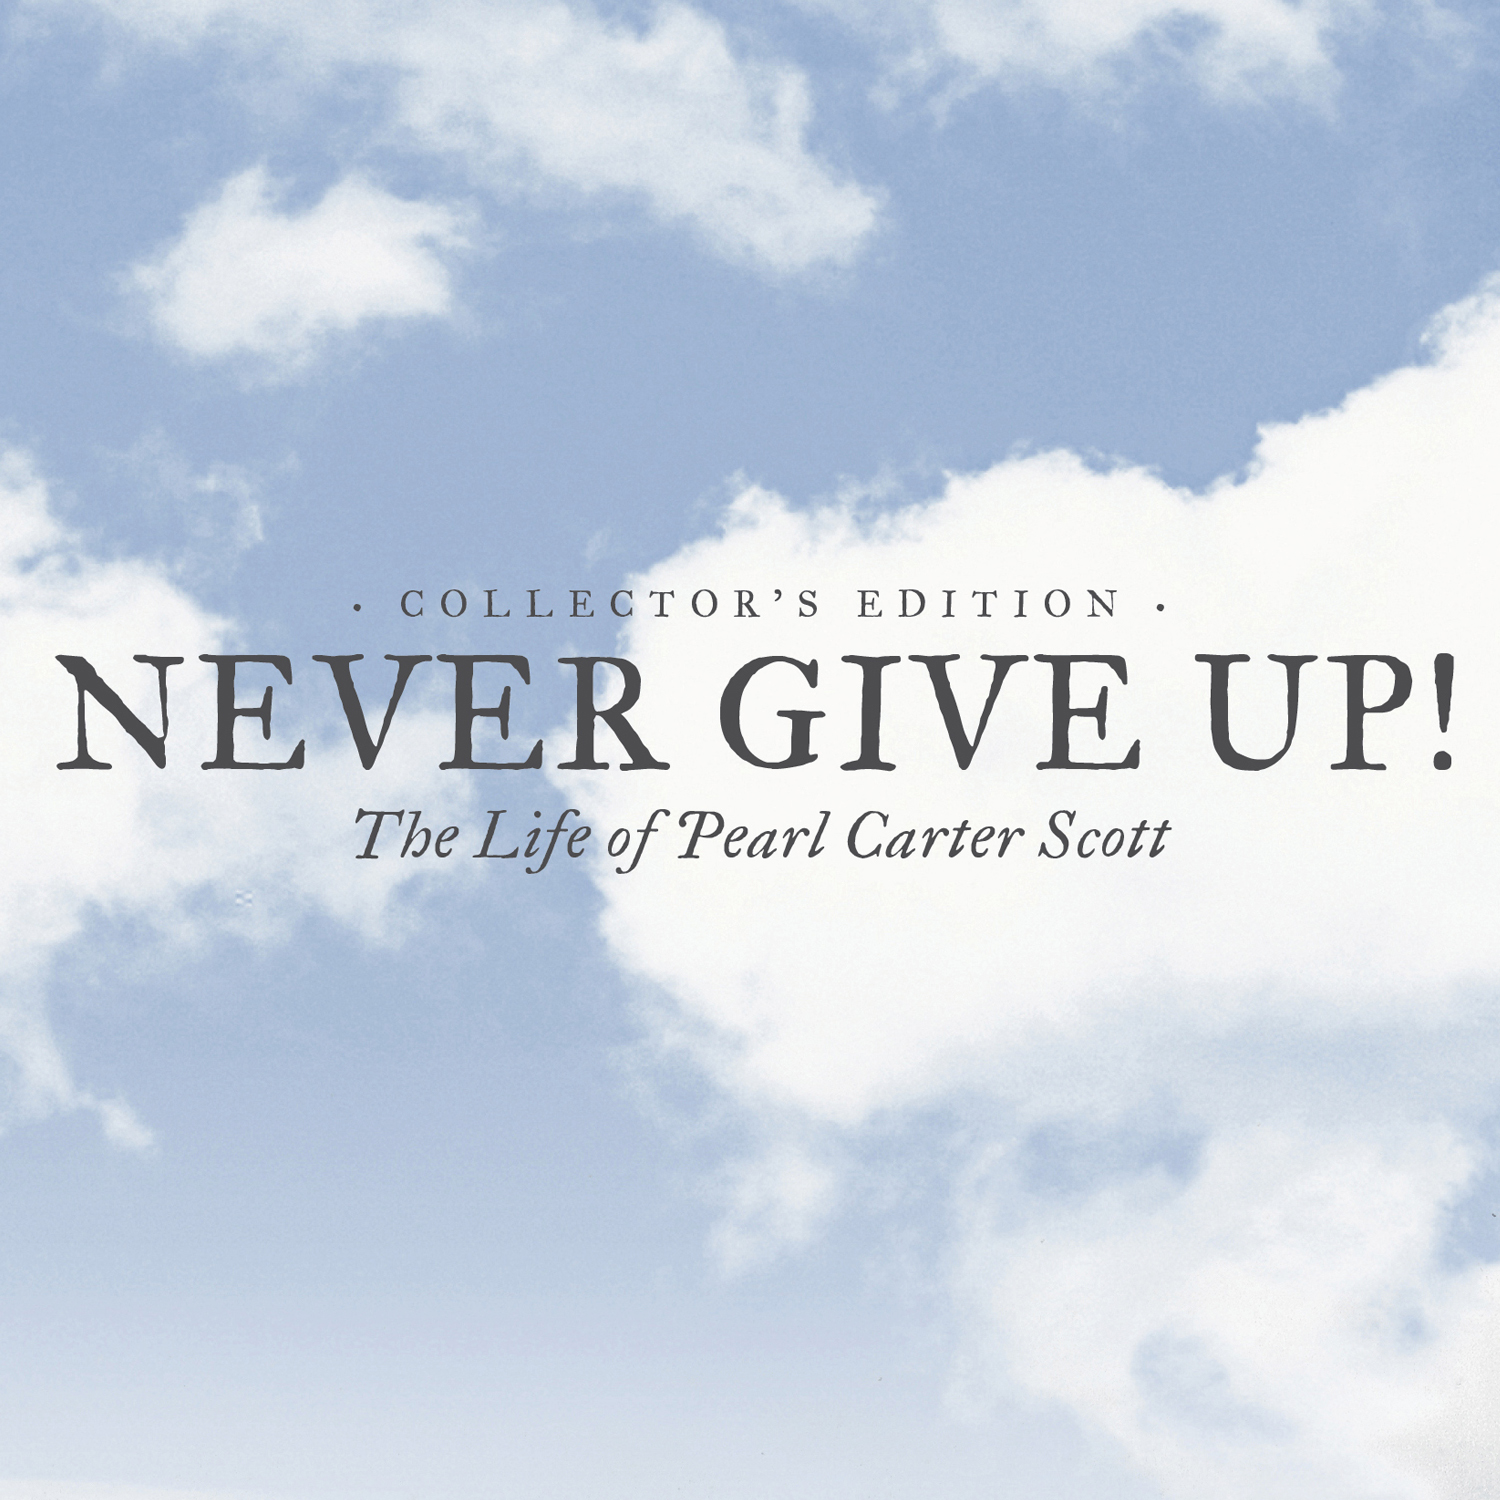 Never Give Up! The Life of Pearl Carter Scott – Collector’s Edition